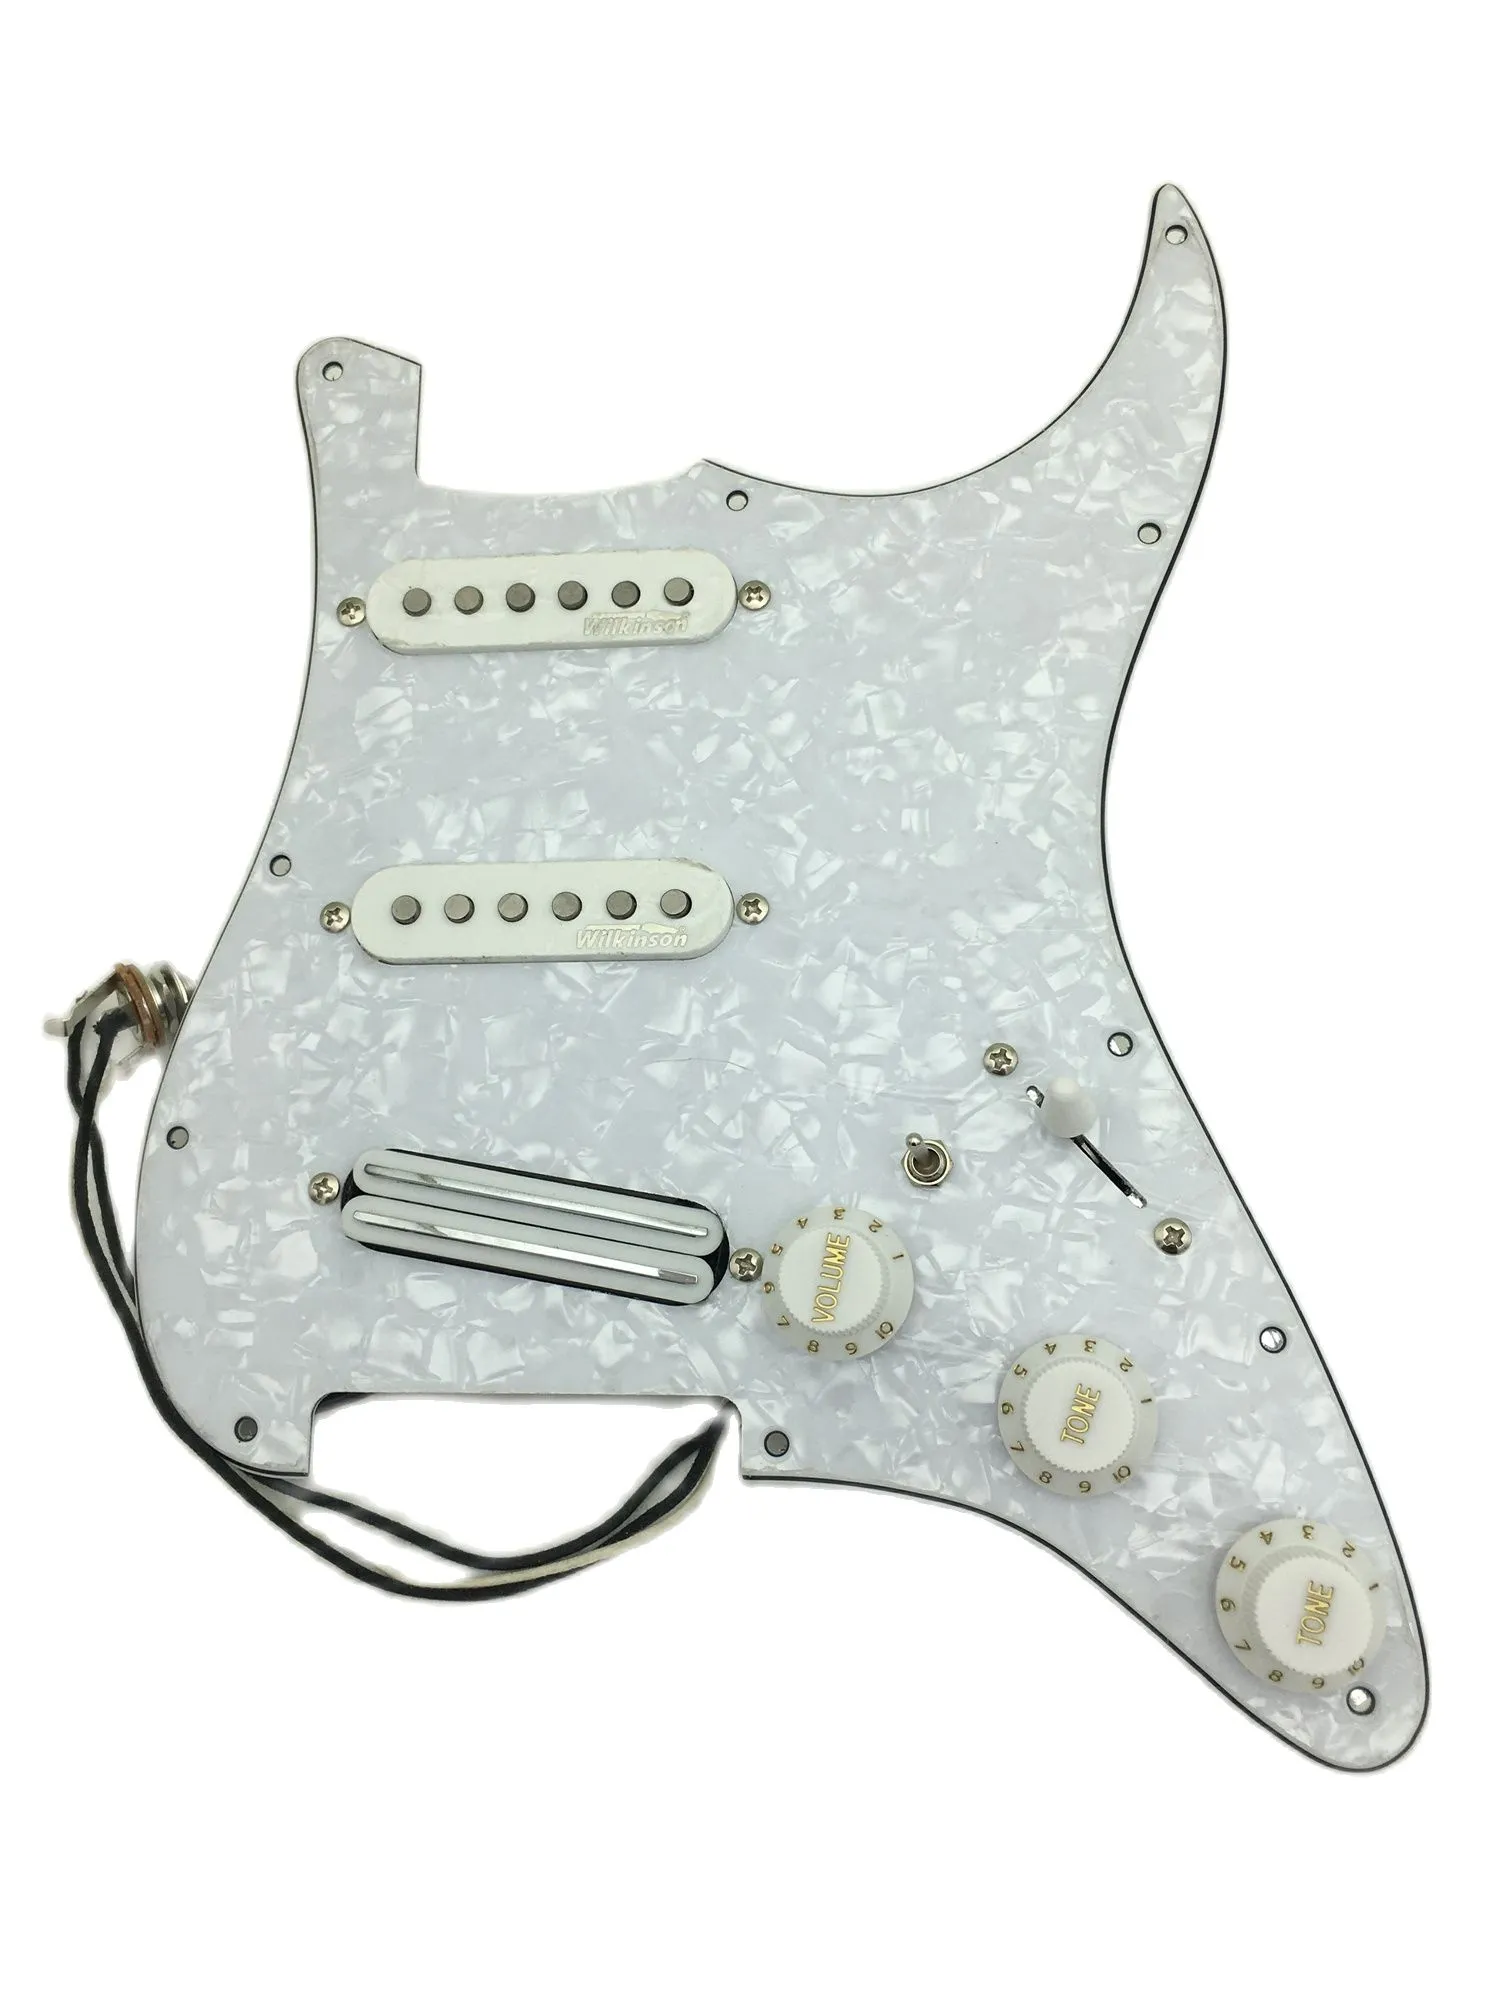 Prewired Pickguard SSS White Wk Alnico Pickups 7 Way Switch Multifunction Wireing Harness Guitar Parts